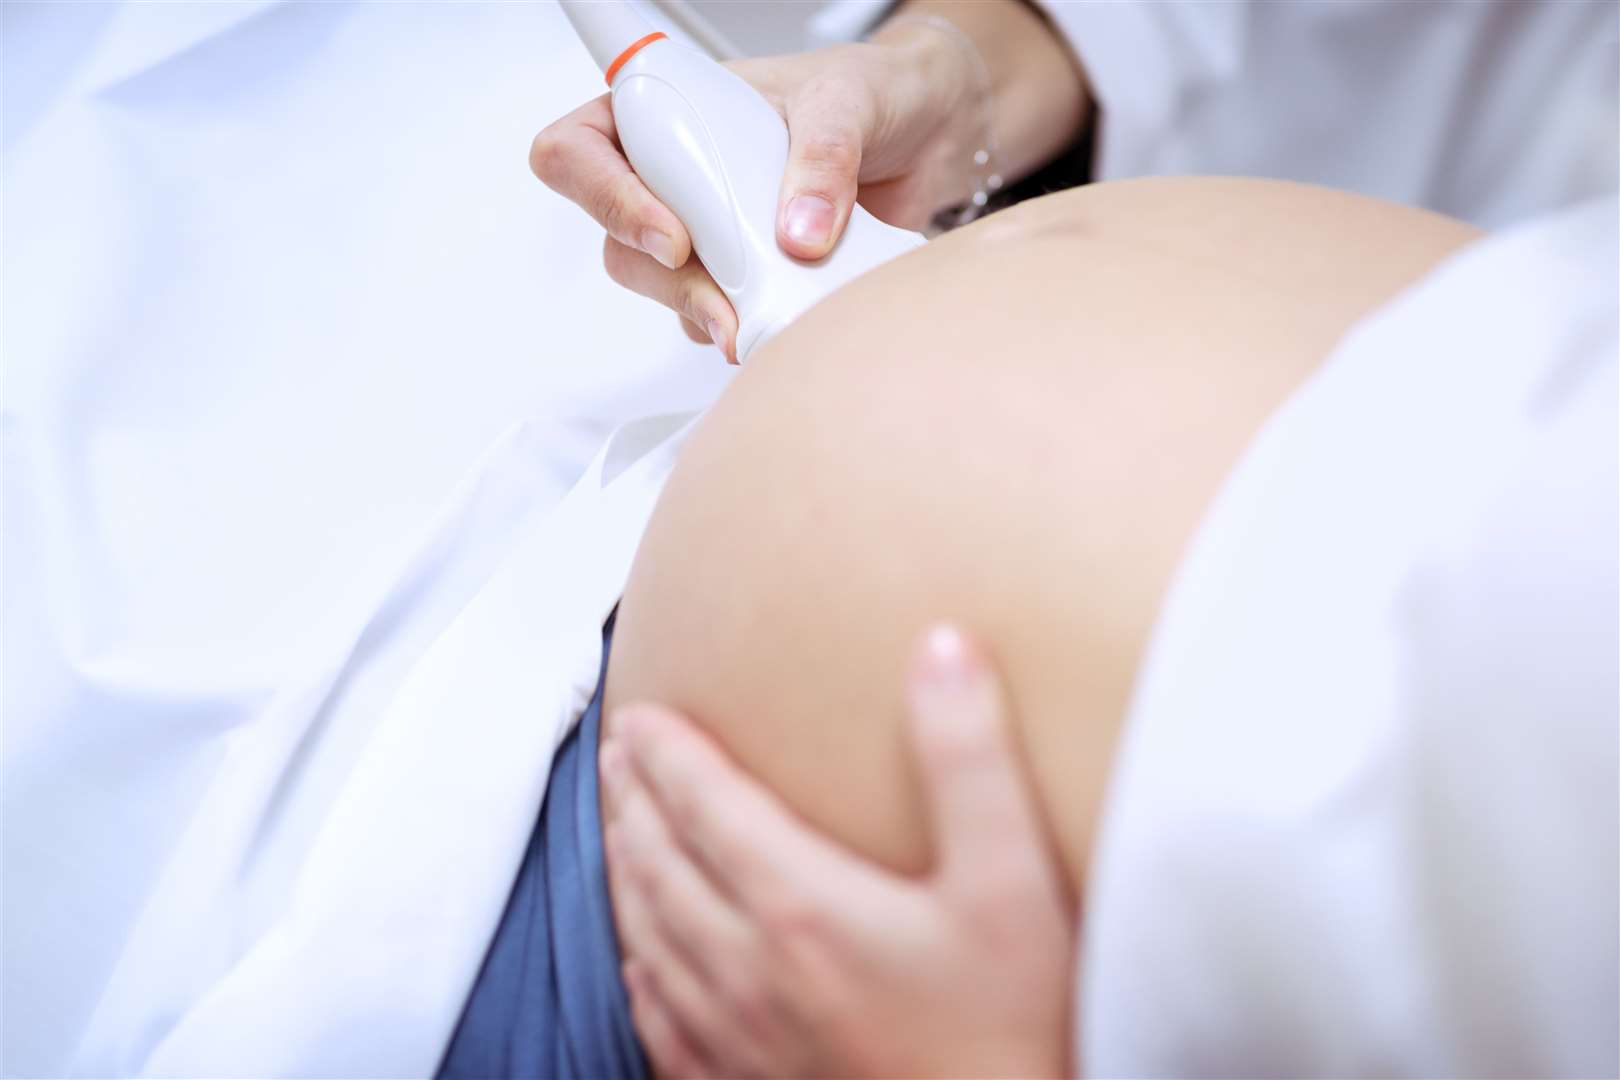 There has been a slow down in the number of pregnant women getting a vaccine. Image: iStock.